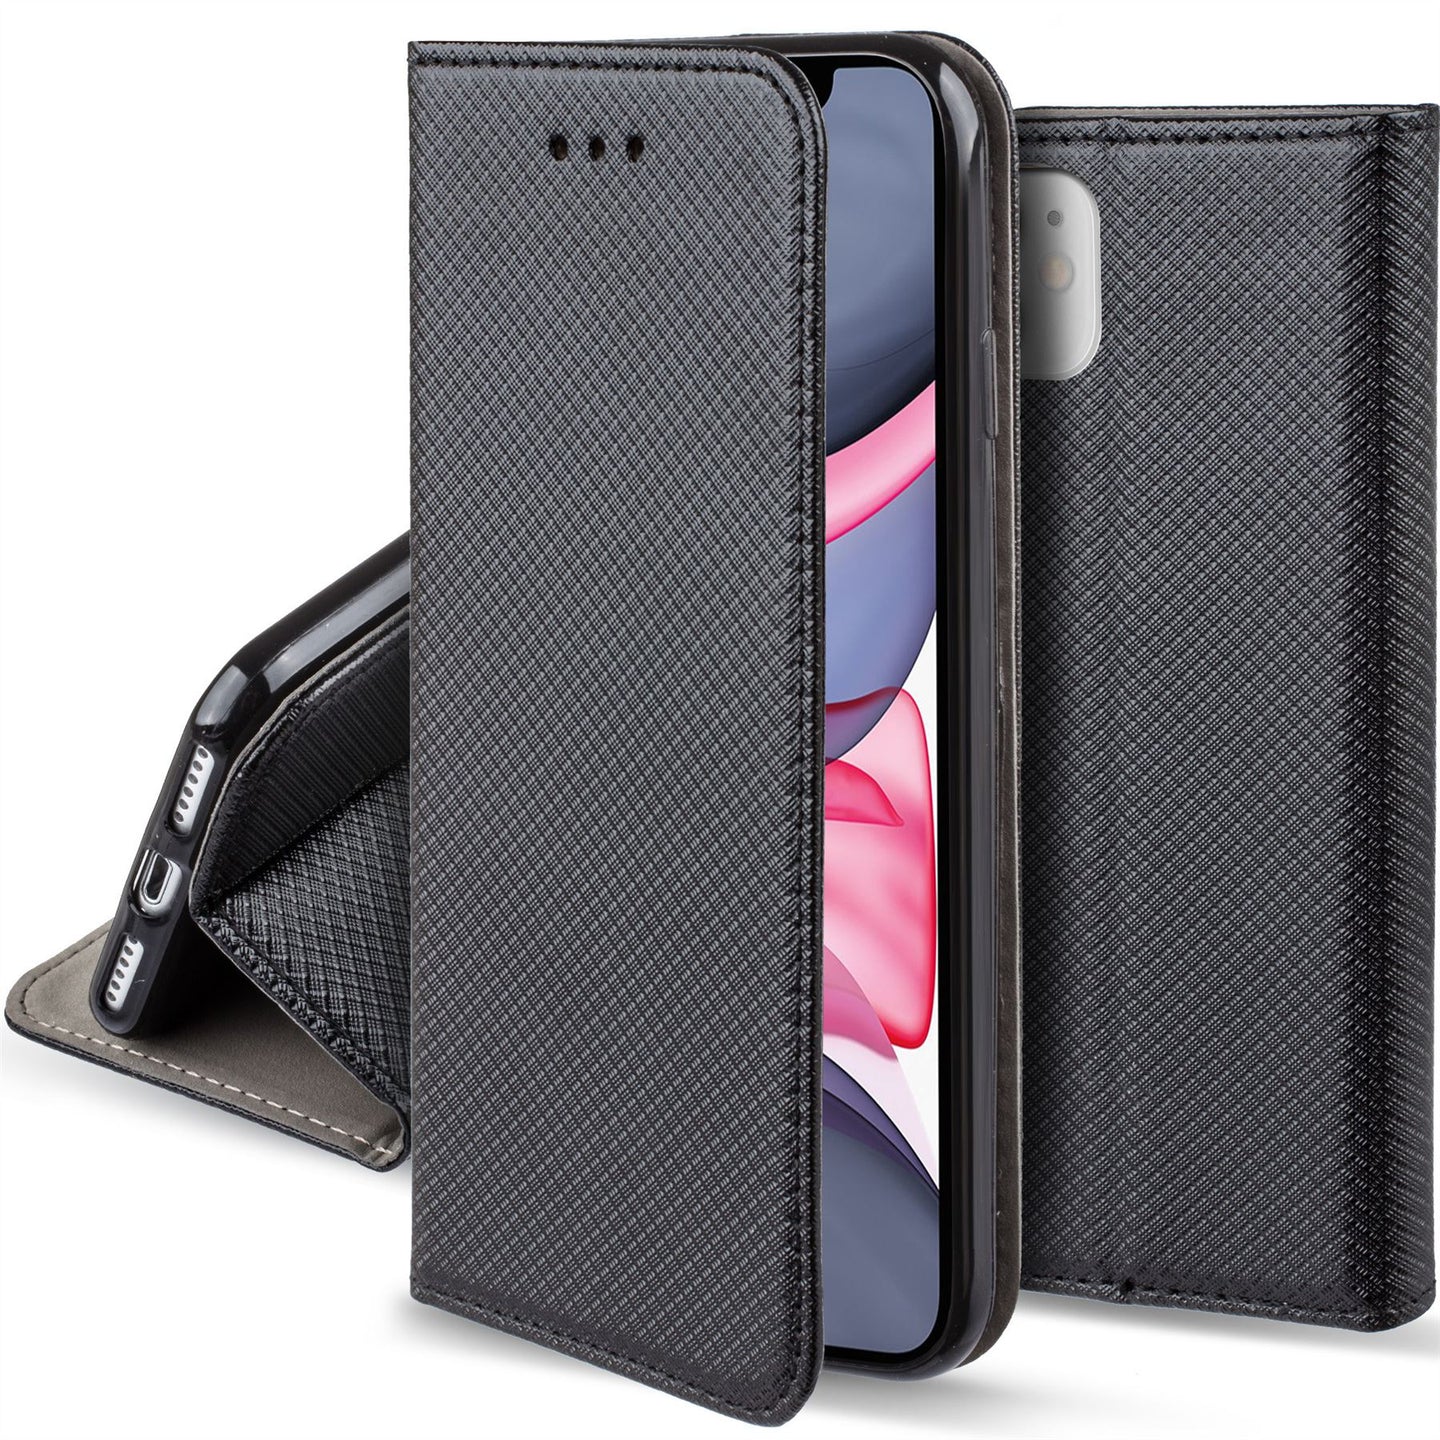 Moozy Case Flip Cover for iPhone 11, Black - Smart Magnetic Flip Case with Card Holder and Stand